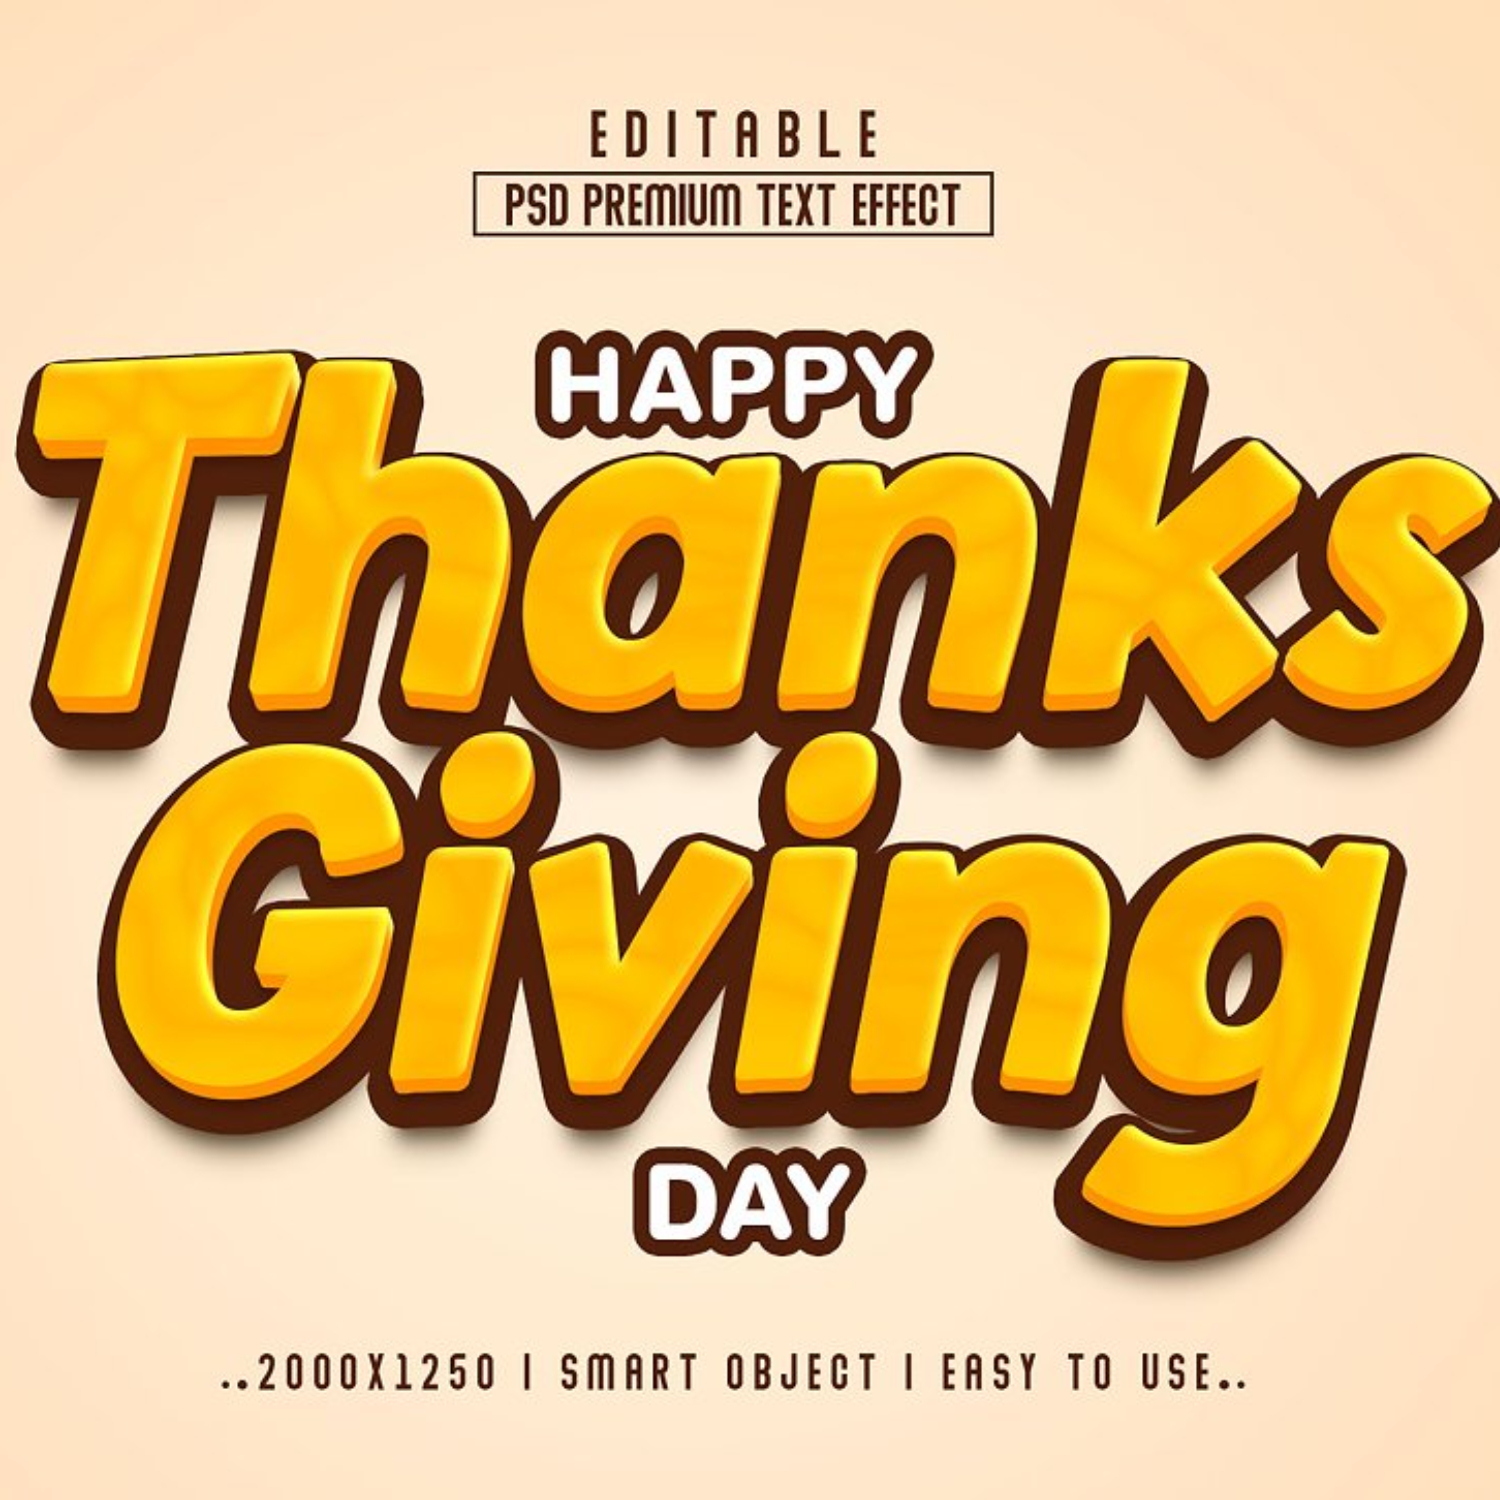 Happy thanksgiving giving day card with the words happy thanksgiving giving day.